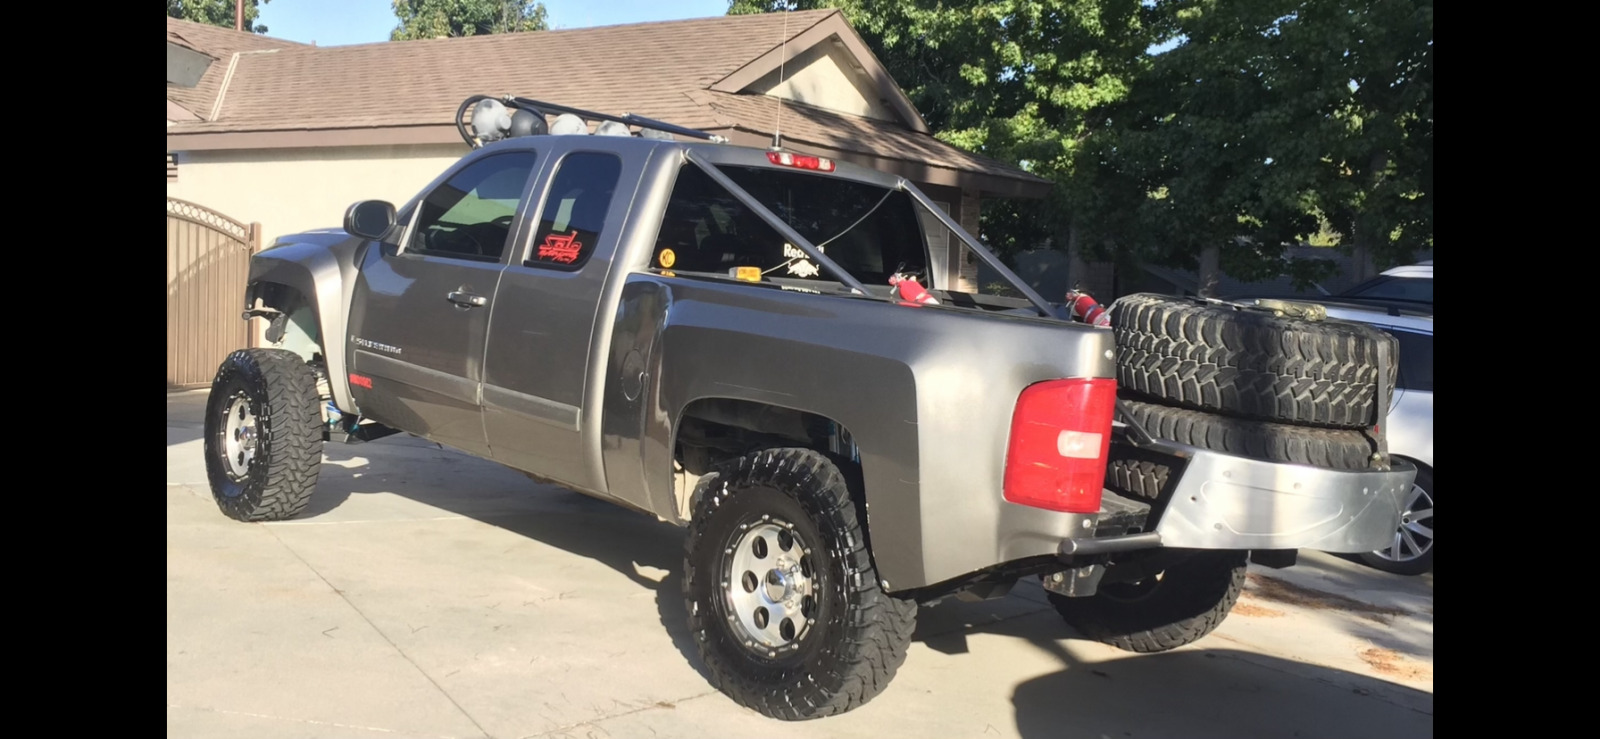 For Sale: 2007 Chevy prerunner and Trailer - photo0